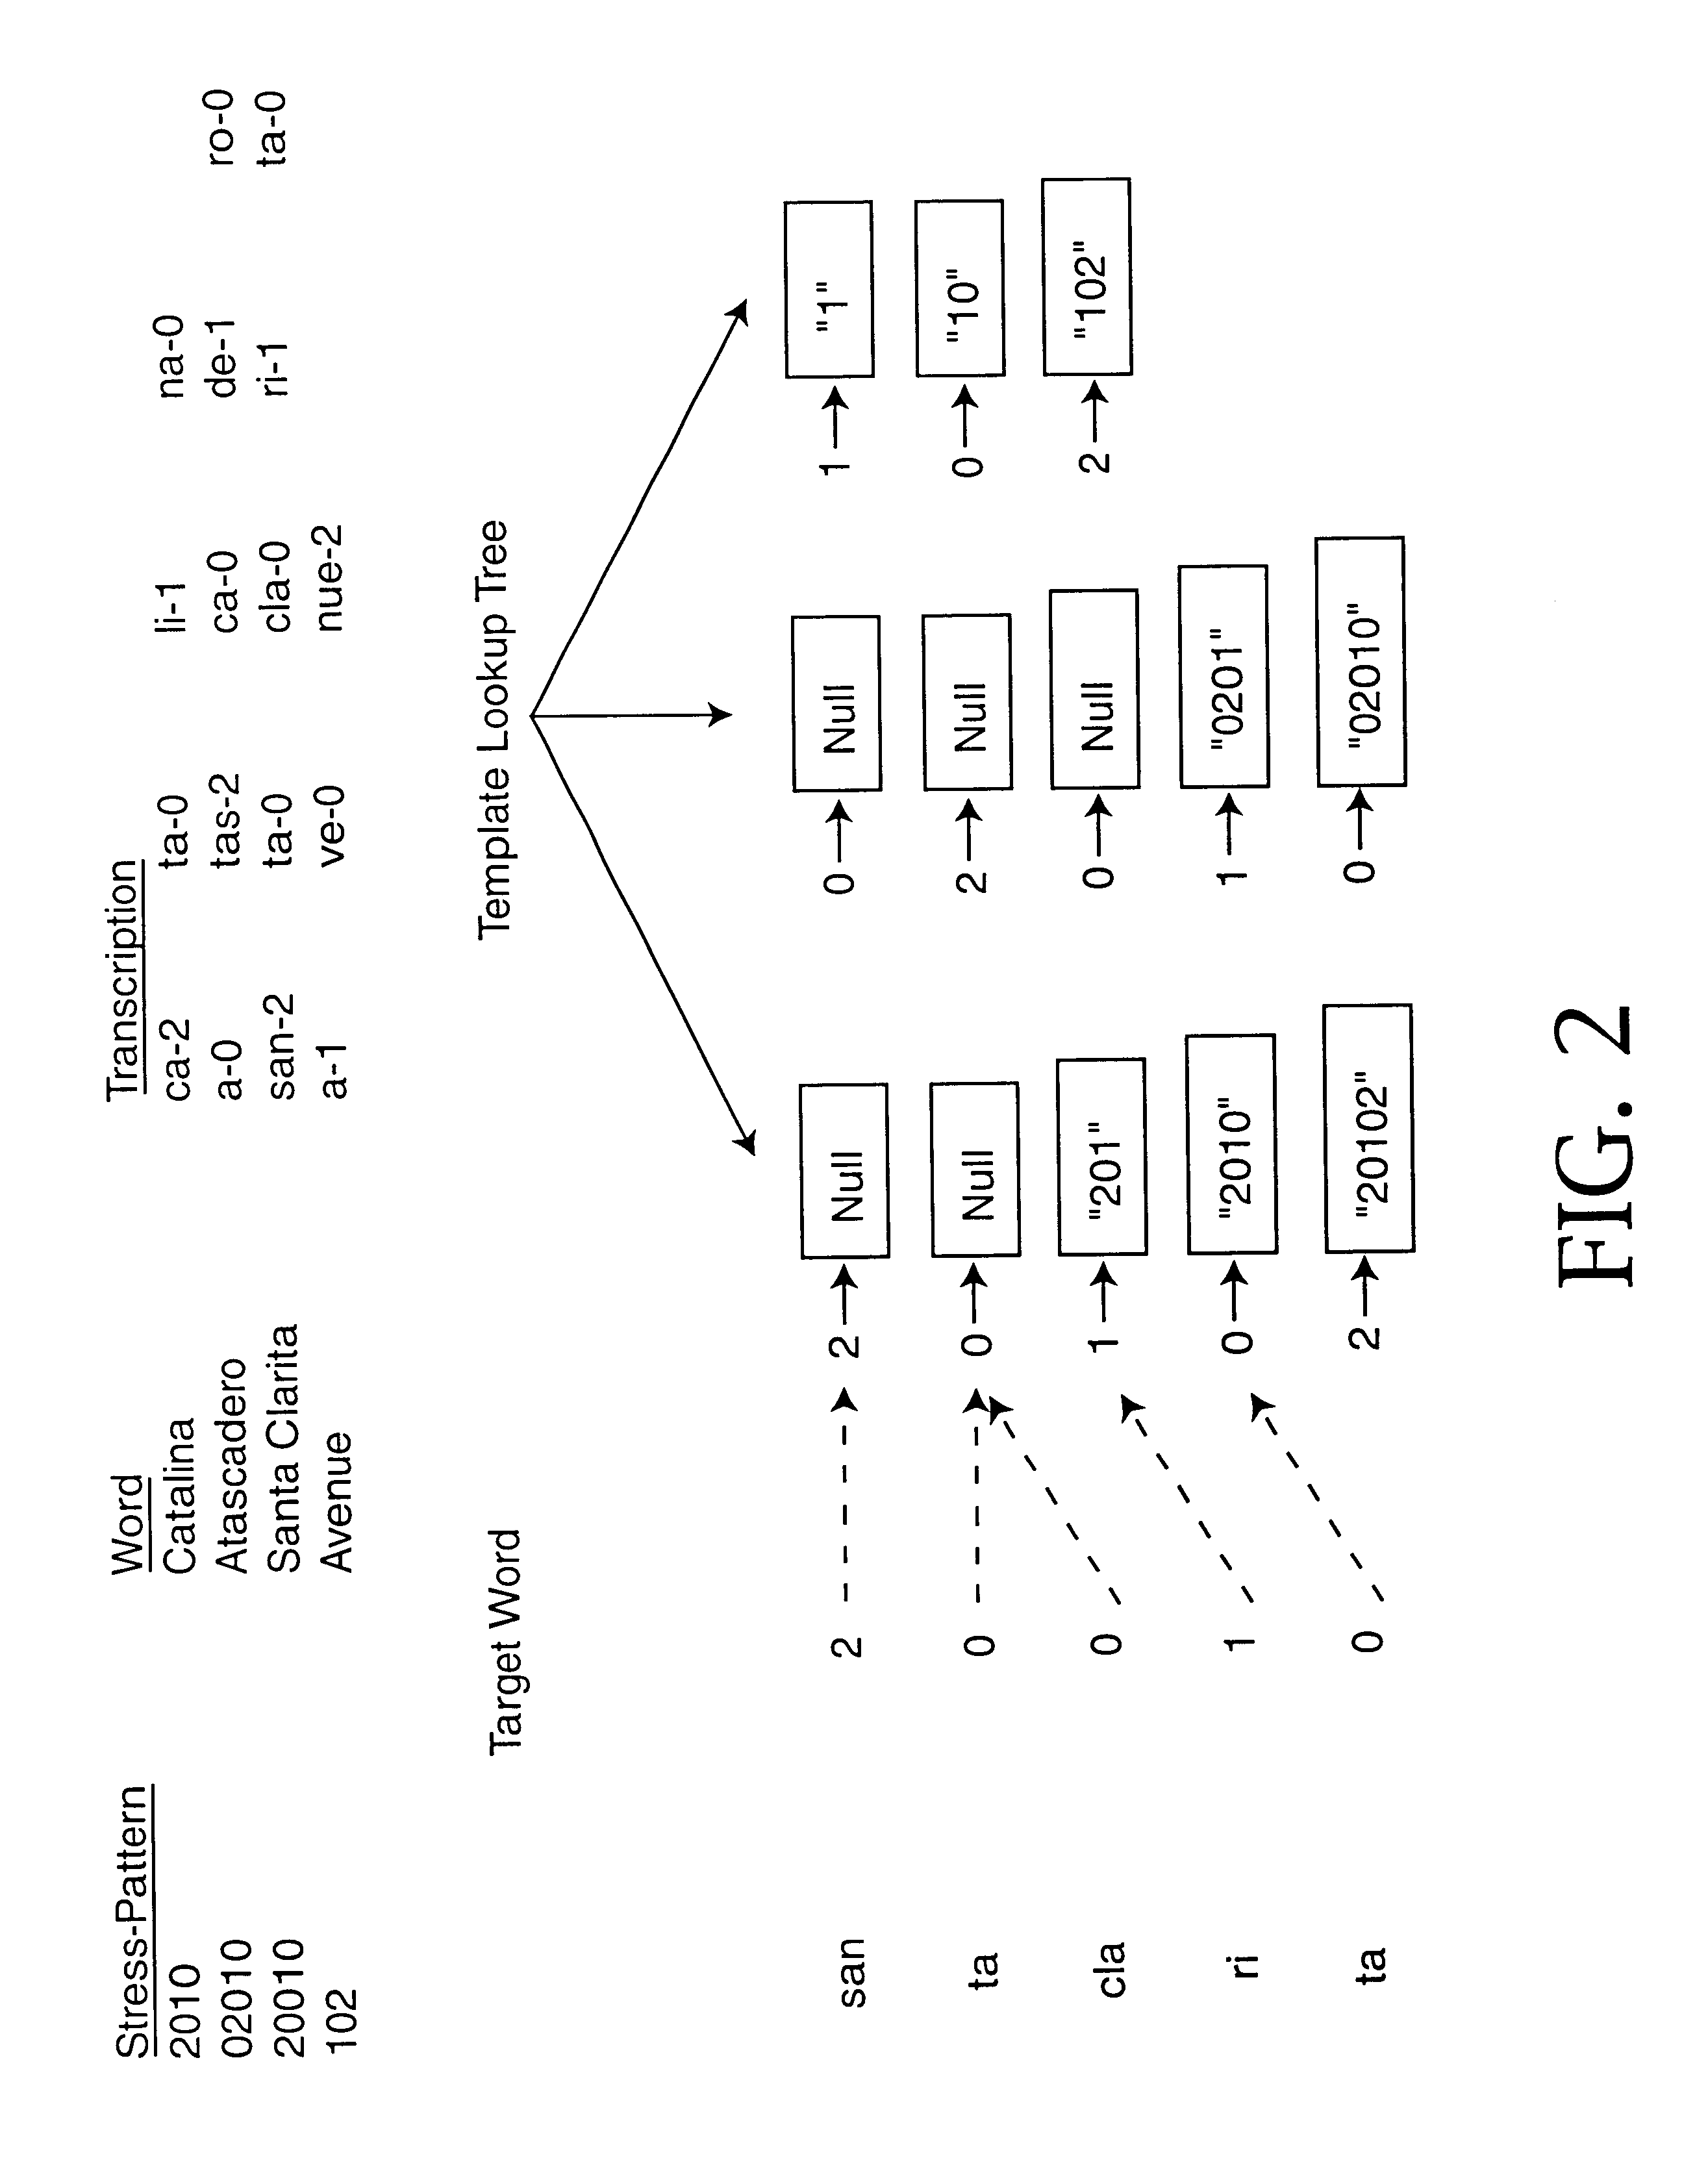 Prosody template matching for text-to-speech systems